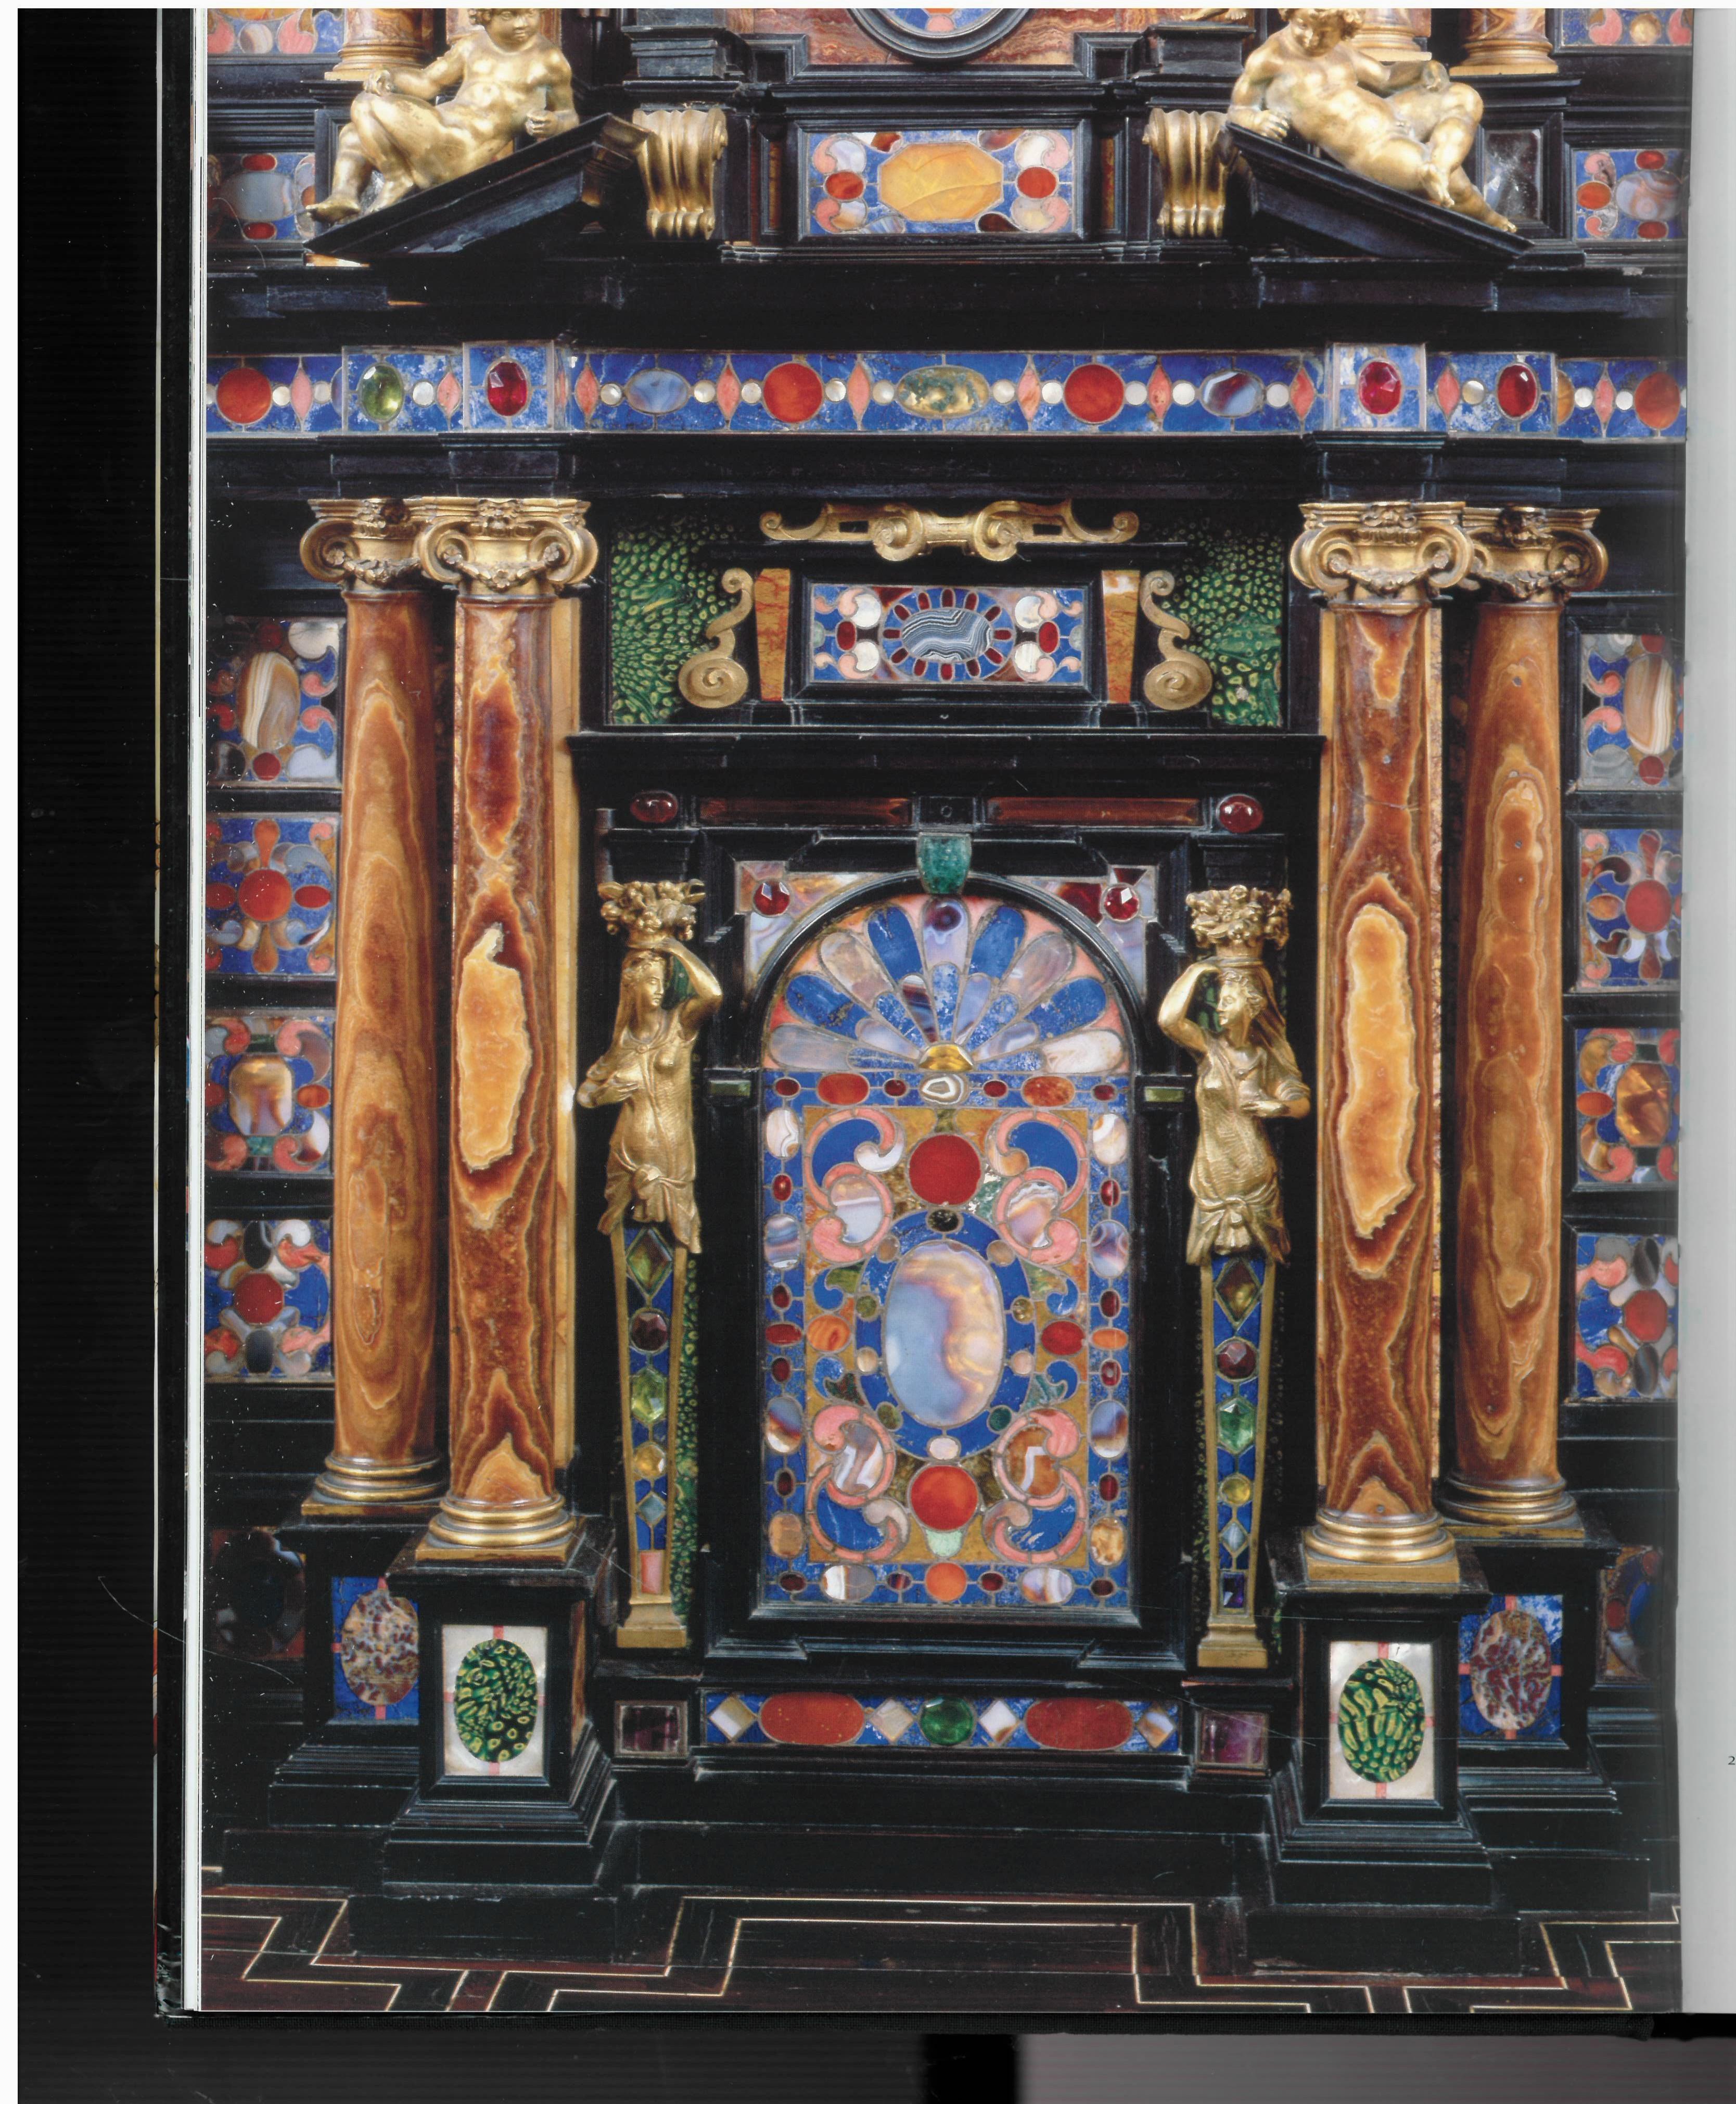 The art of decorative stone work - known as Pietre Dure, or polychrome hardstone inlay resurfaced in Rome in the sixteenth century with the flowering of the Italian Renaissance. Tabletops and pieces of furniture were covered in stones, inlaid into